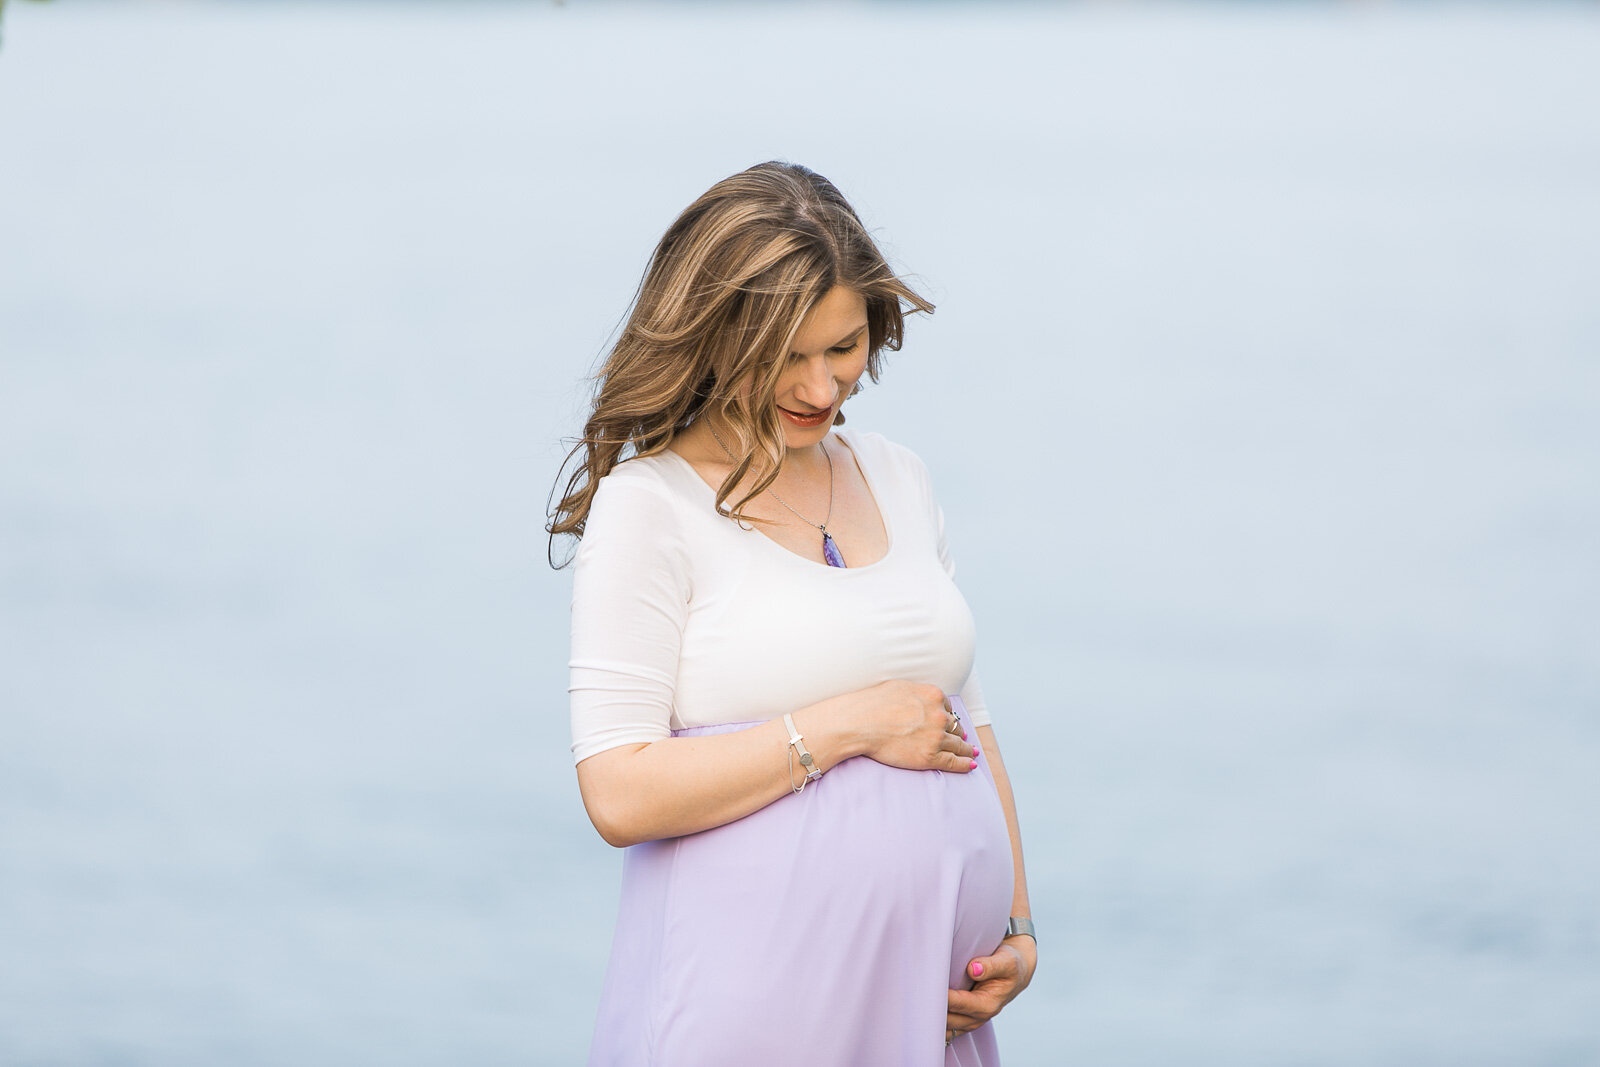 Waterfront Maternity Photos at Parc Rene Levesque